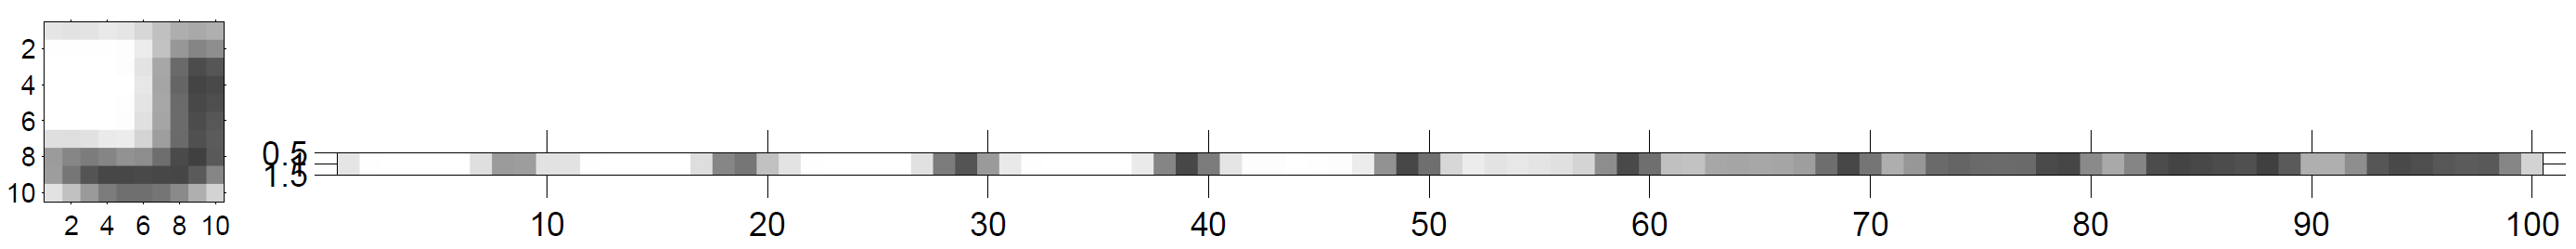 Pixels are represented by a row vector of concatenated columns. First comes the first column, then the second etc. It is obvious that dark columns of the letter J, which are in the extreme right part of the image, are at the end of the data vector.